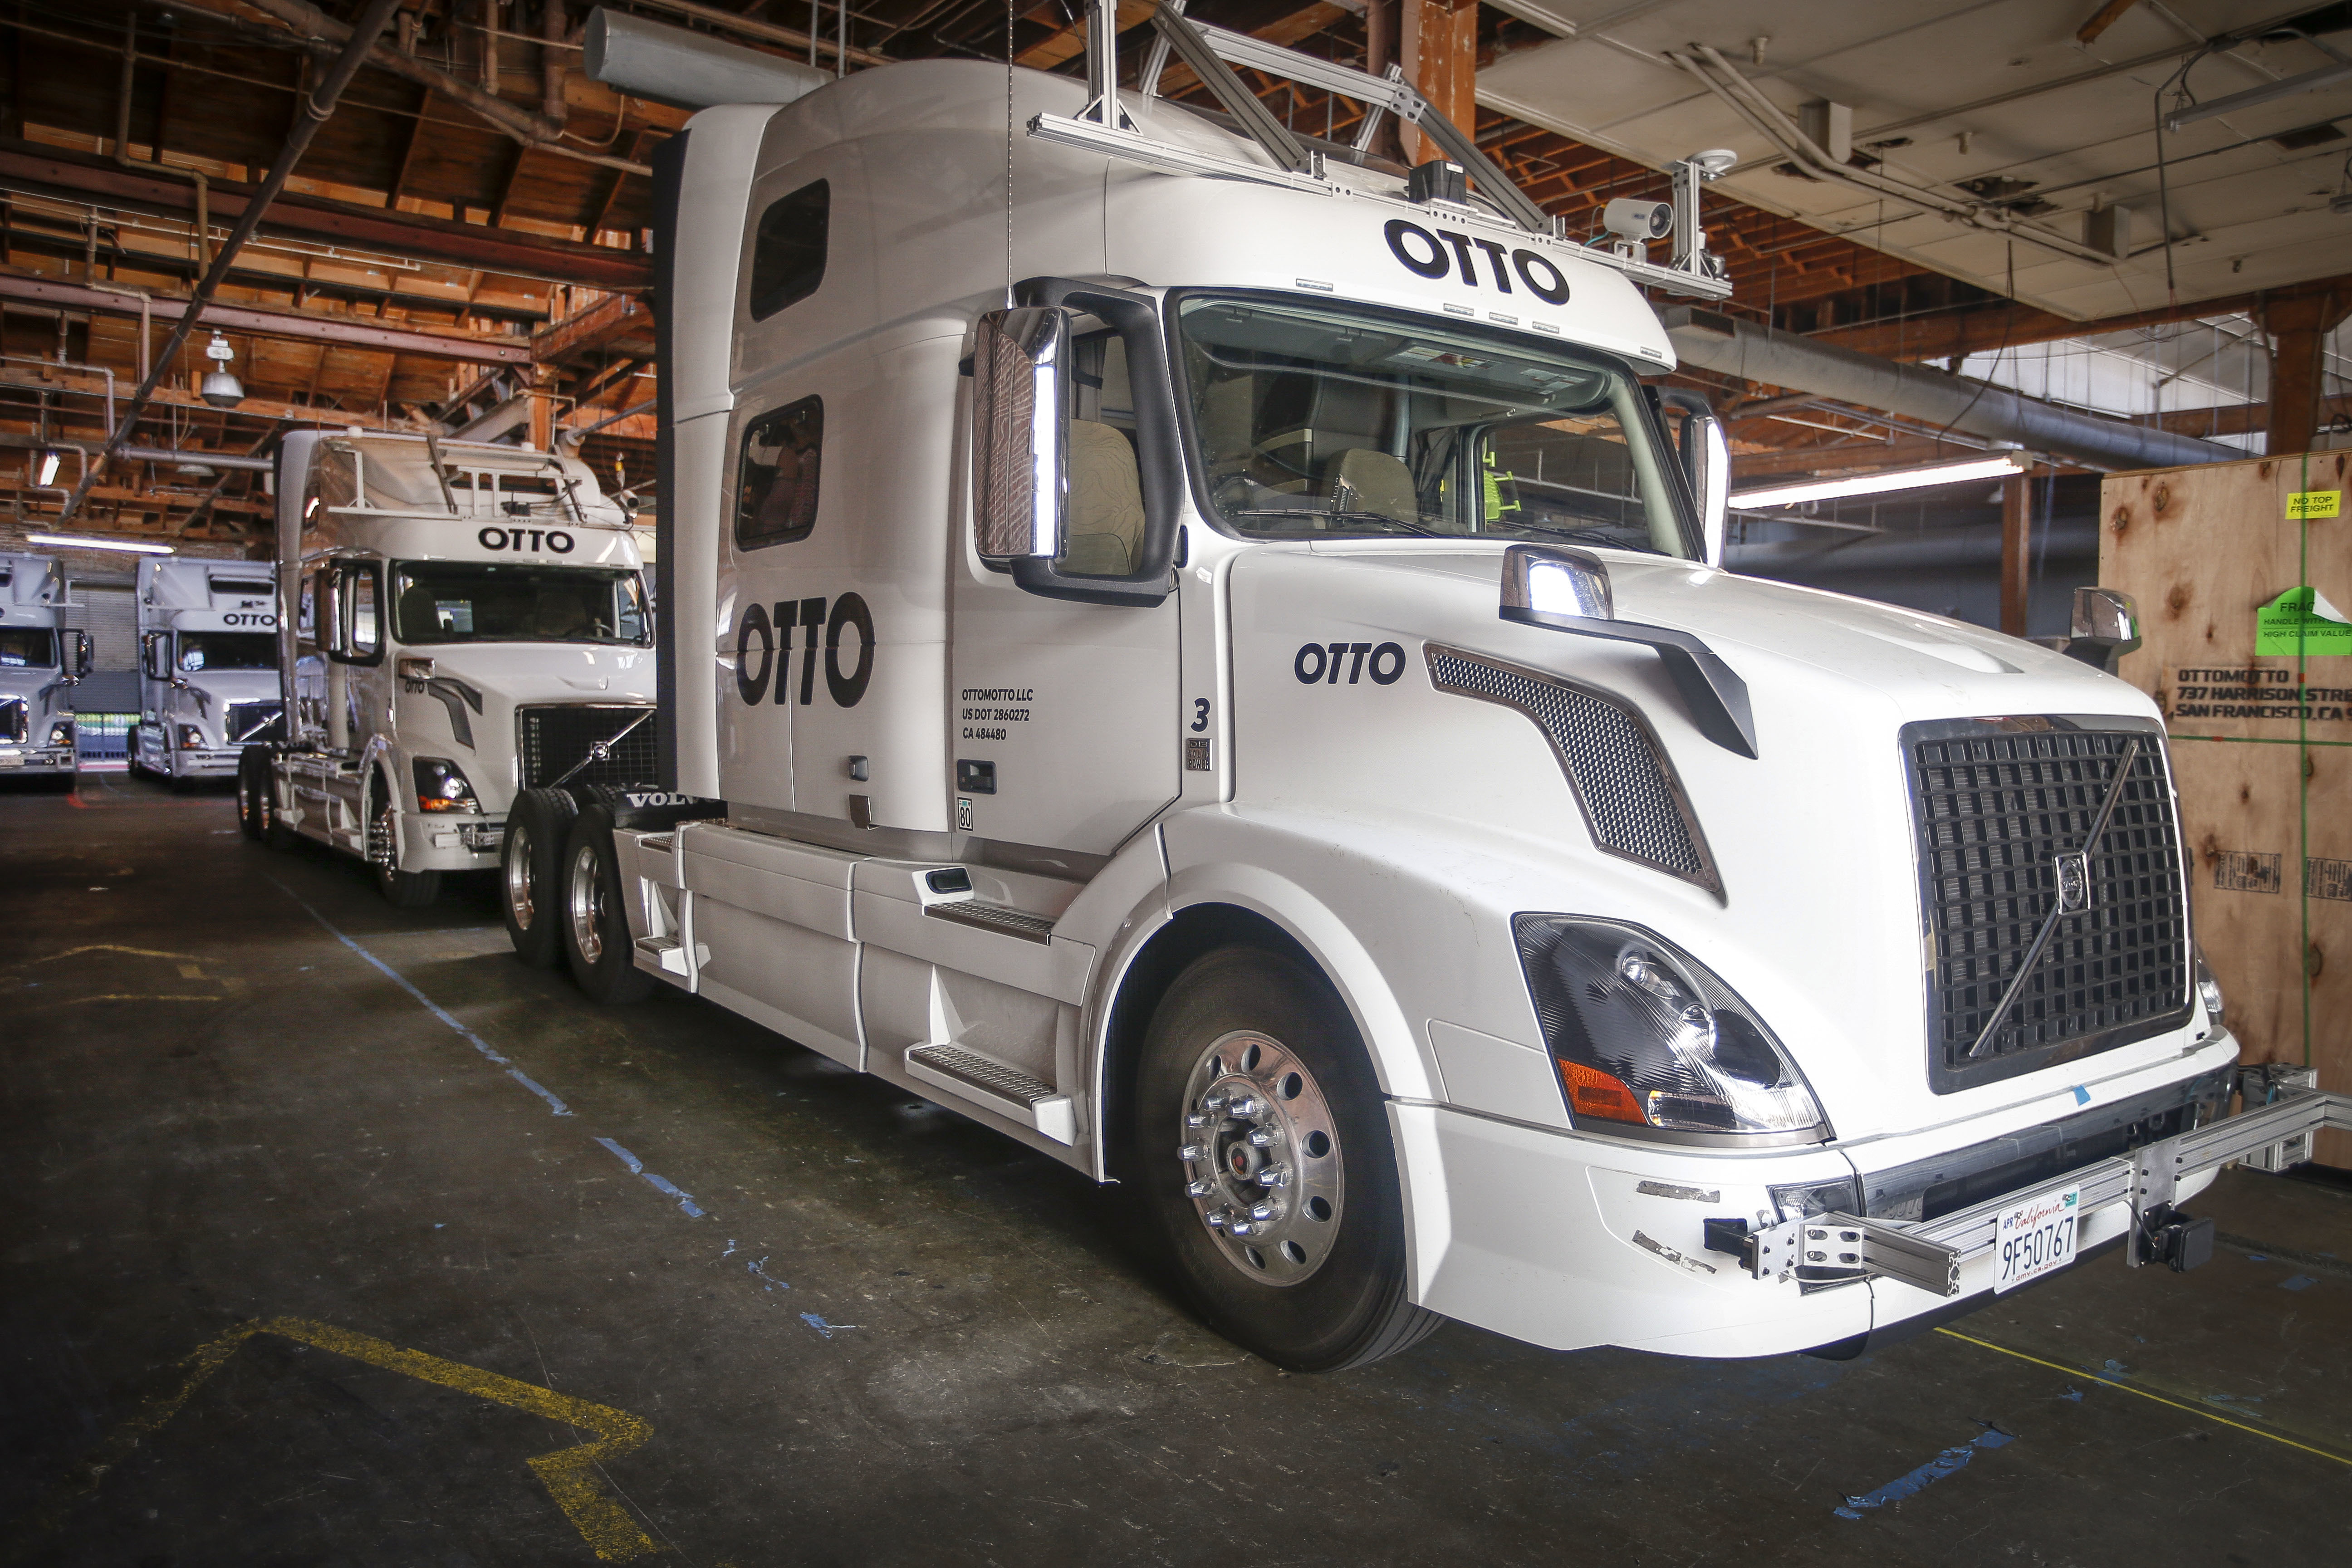 Uber acquired self-driving startup Otto, which has developed technology allowing big rigs to drive themselves. (AP Photo/Tony Avelar)